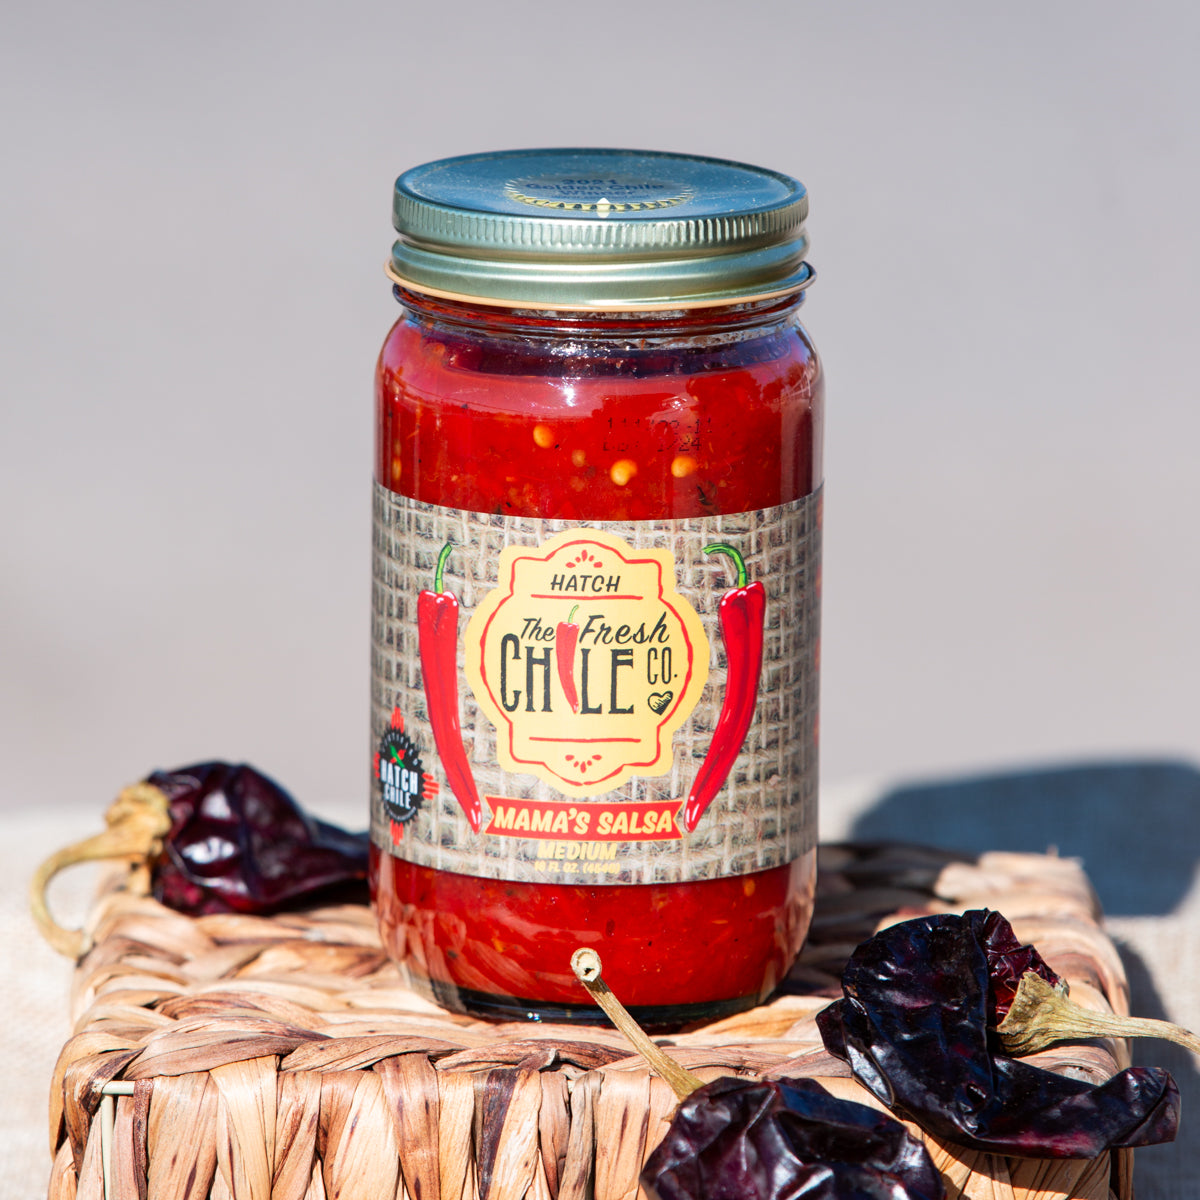 A jar of Hatch "The Fresh Chile Co" medium salsa from the Salsa Sampler sits on a woven mat, surrounded by dried red chili peppers, with a blurred background.